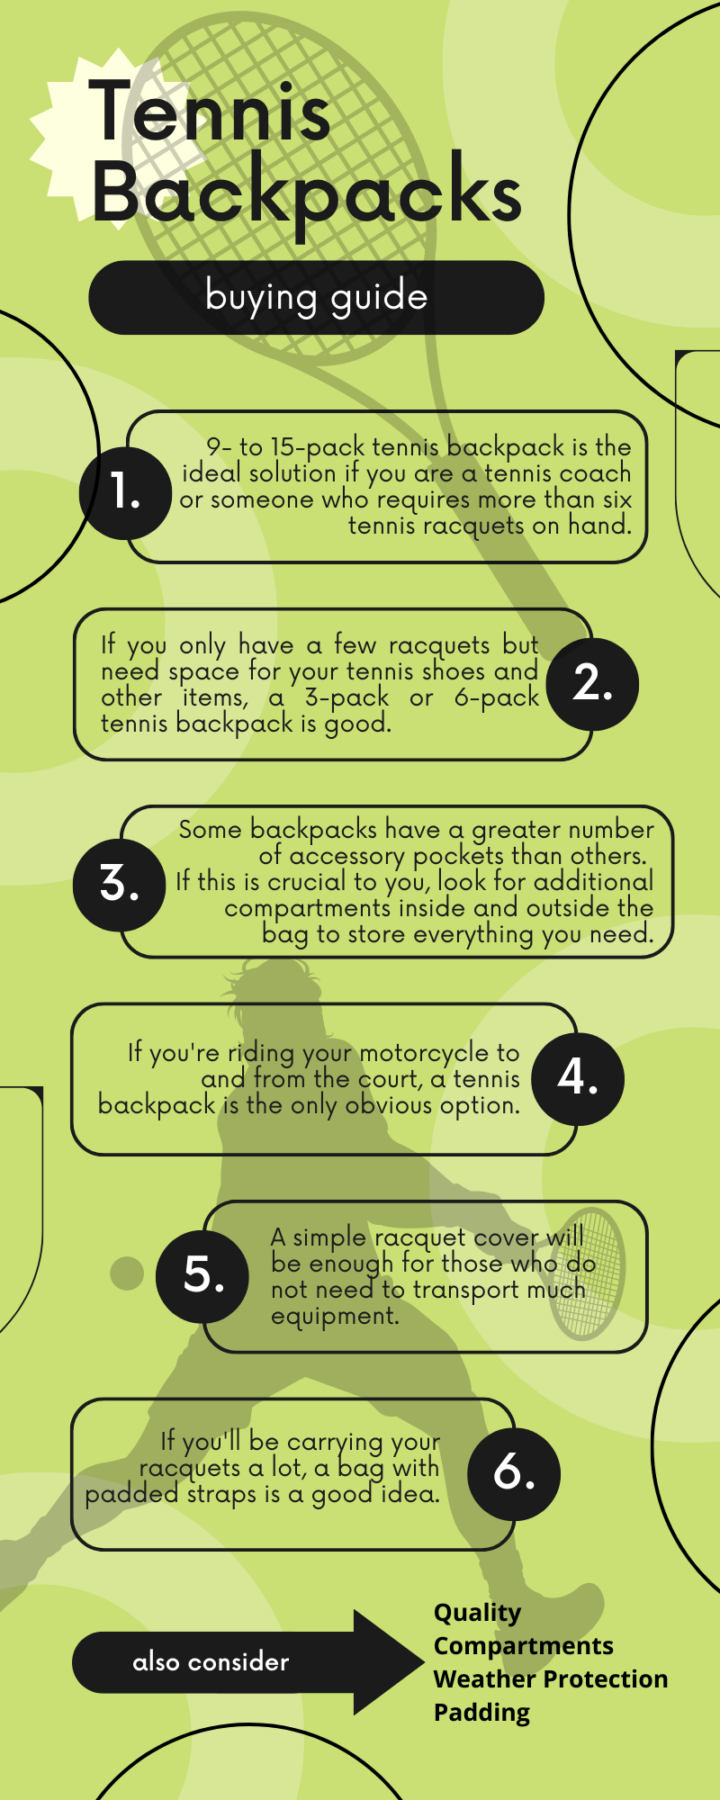 Tennis Backpacks infographic